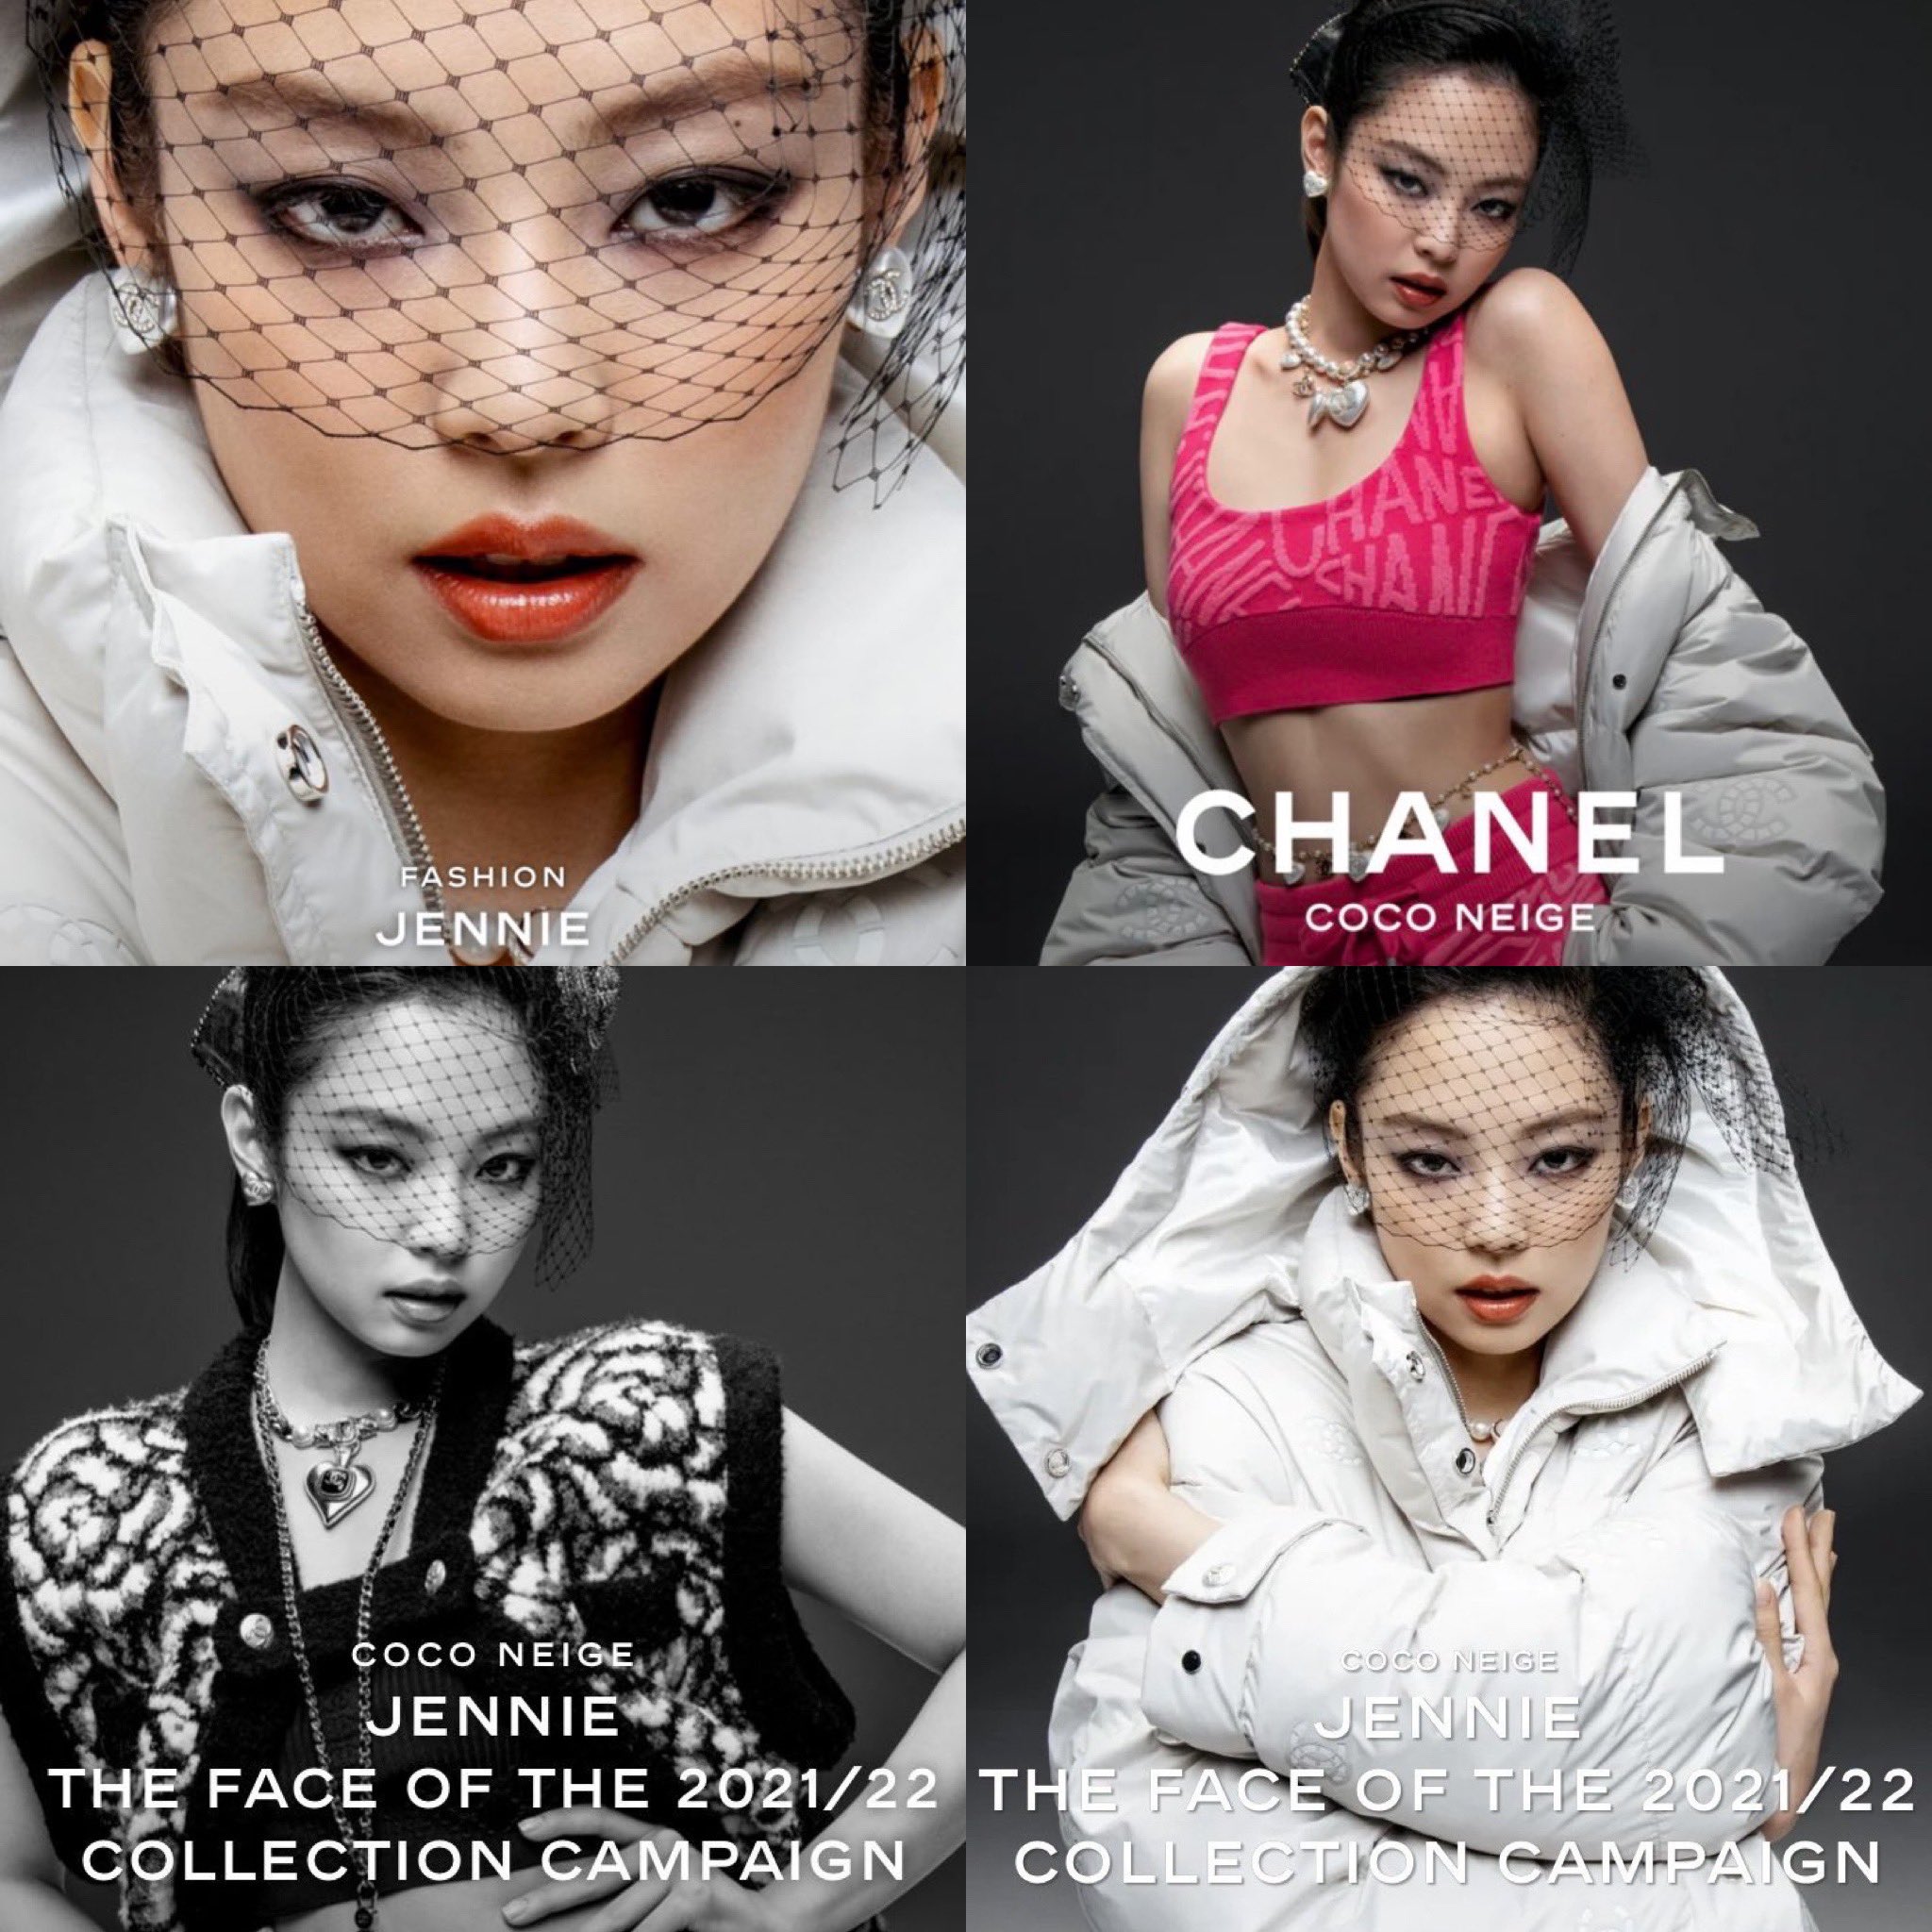 Jennie is the New Face of Chanel Coco Neige 2021/22 Collection - V Magazine